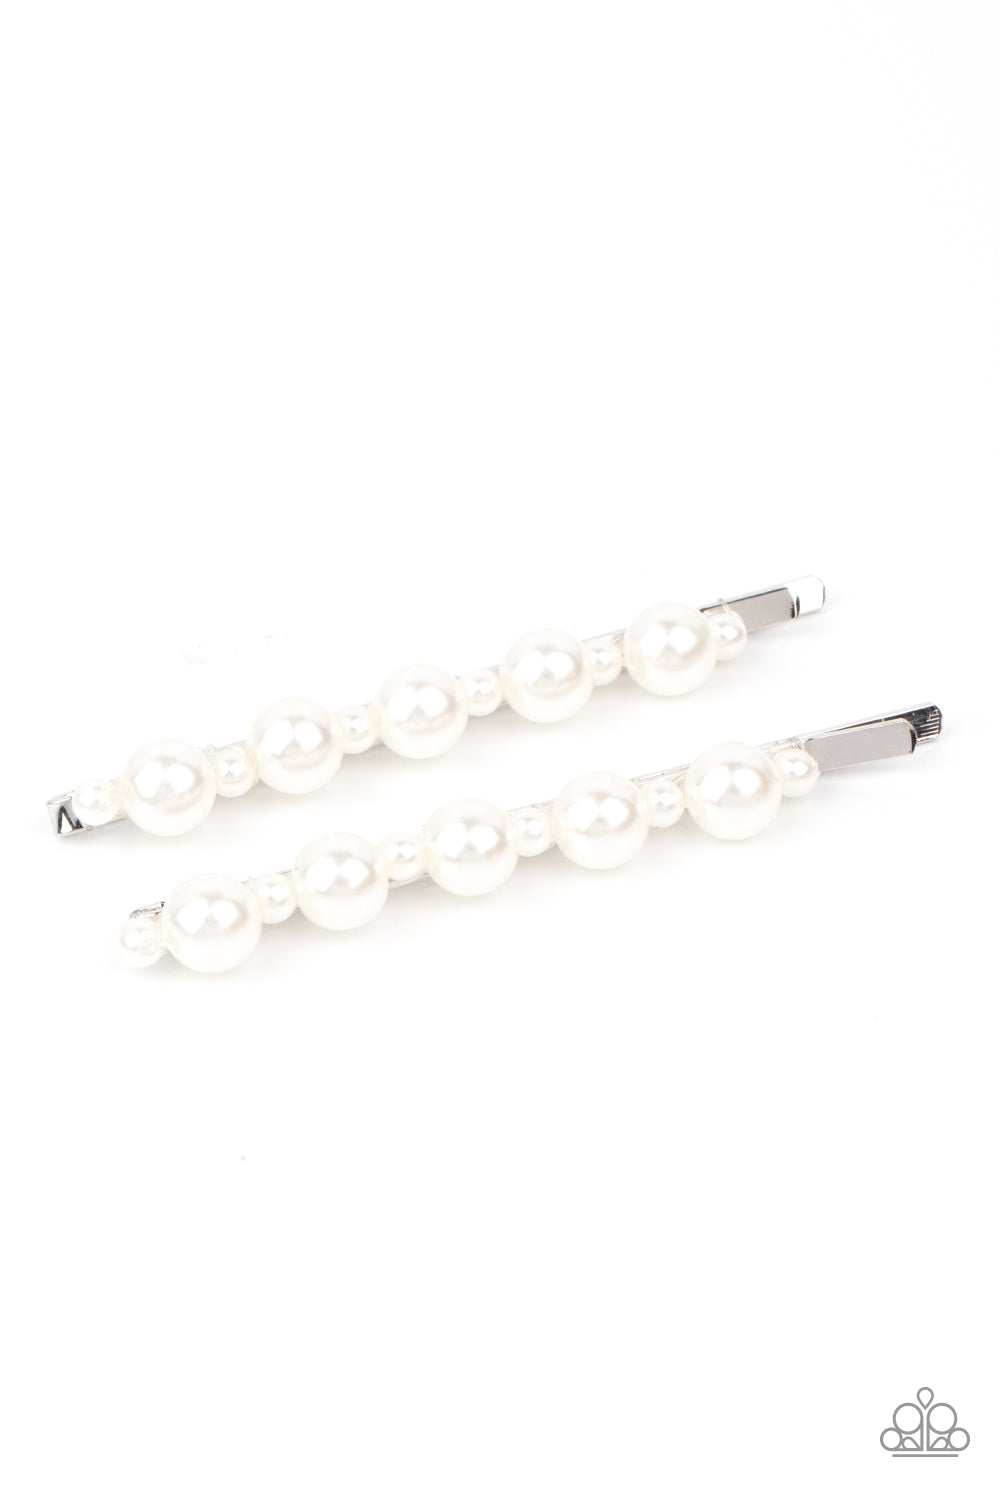 Put A Pin In It - White Pearl Hair Accessory Paparazzi Accessories